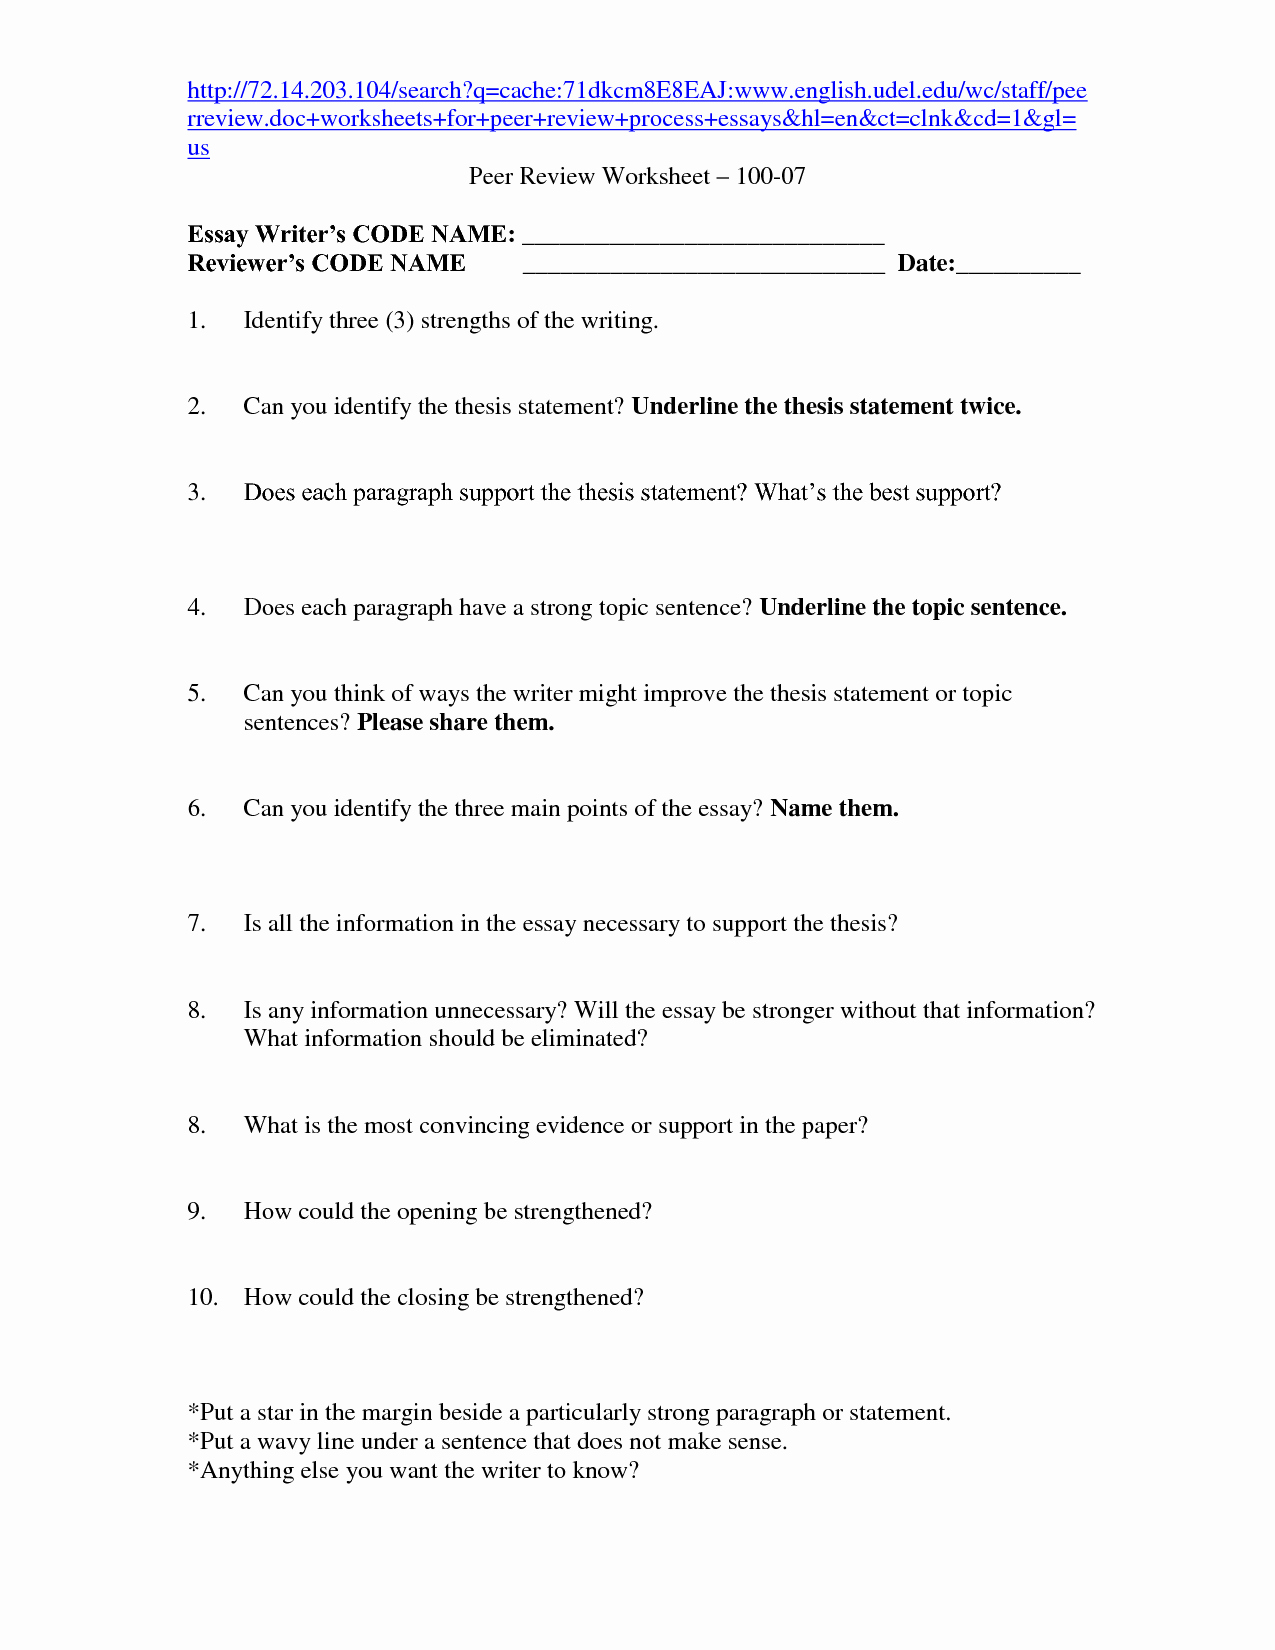 Writing A thesis Statement Worksheet Awesome 16 Best Of Strong thesis Statement Worksheet